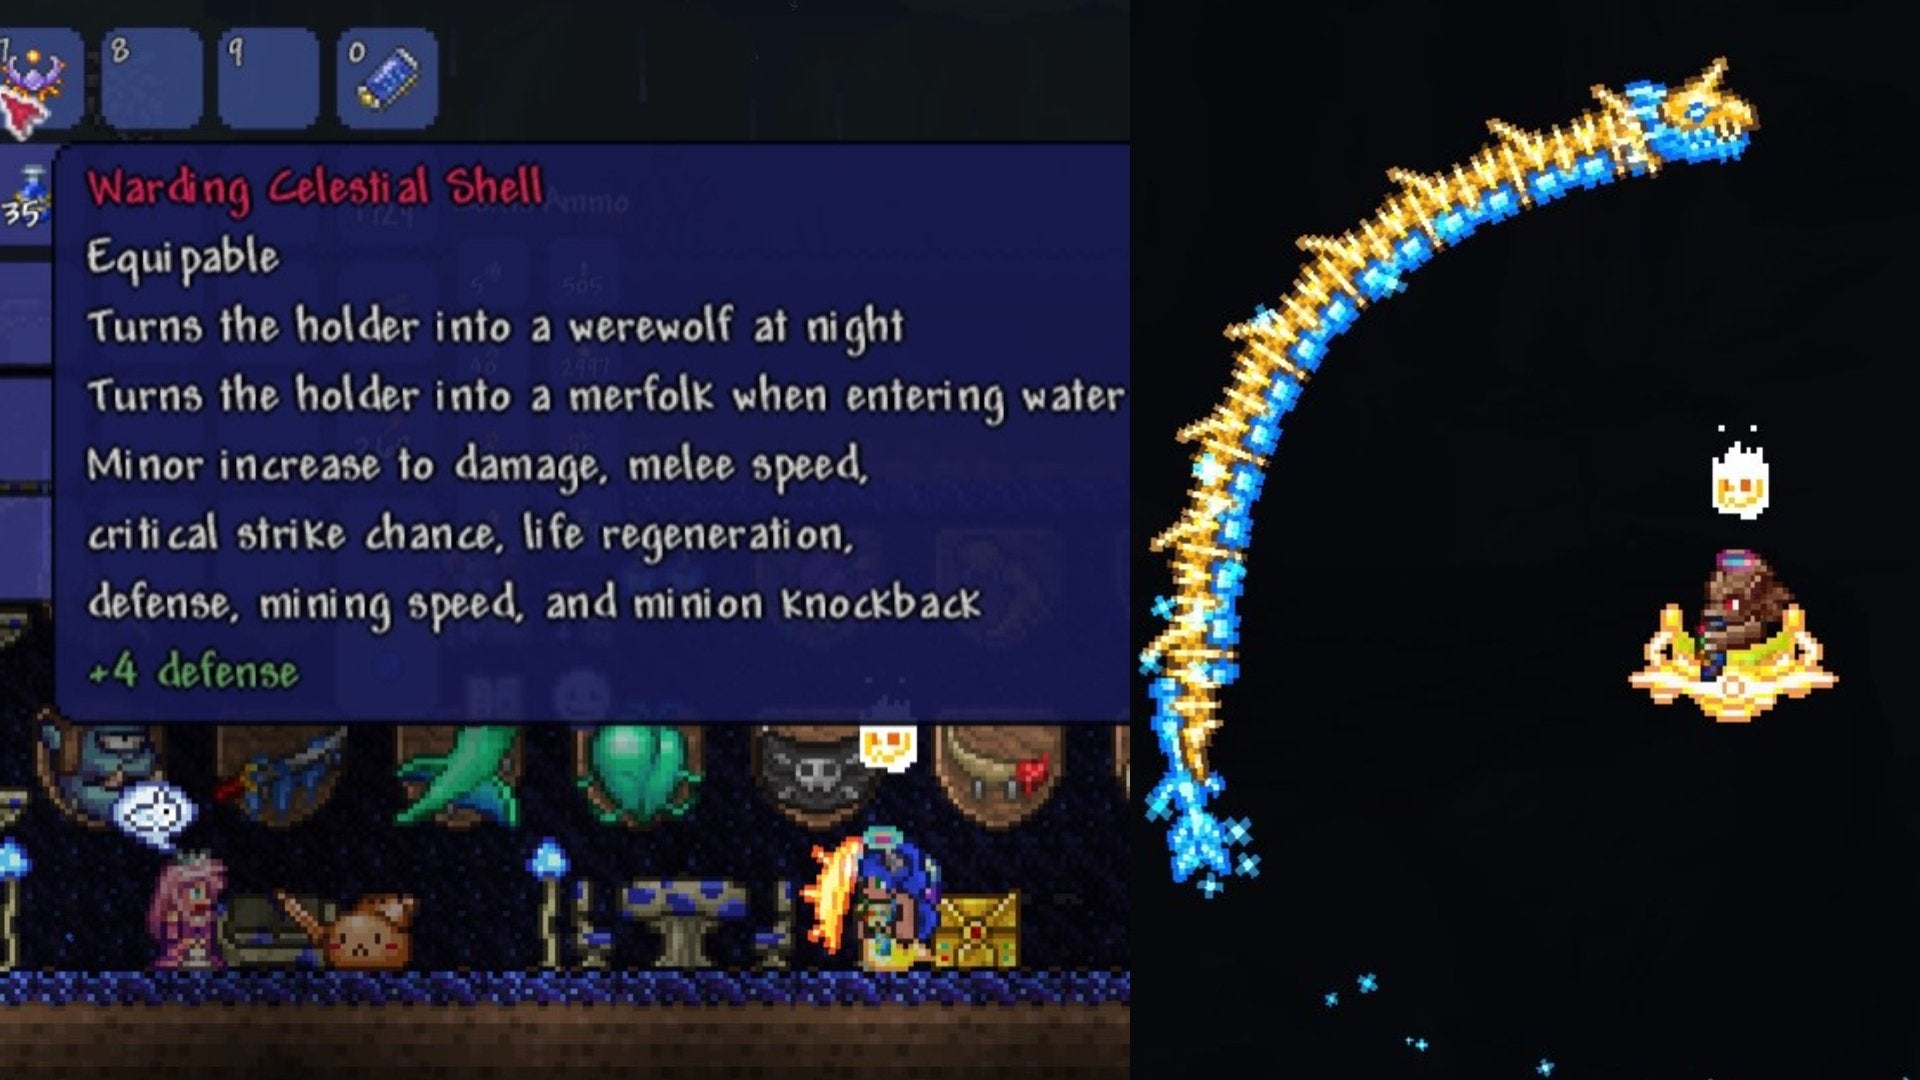 To the left is the tooltip for the Celestial Shell. To the right is a player at night in werewolf form.